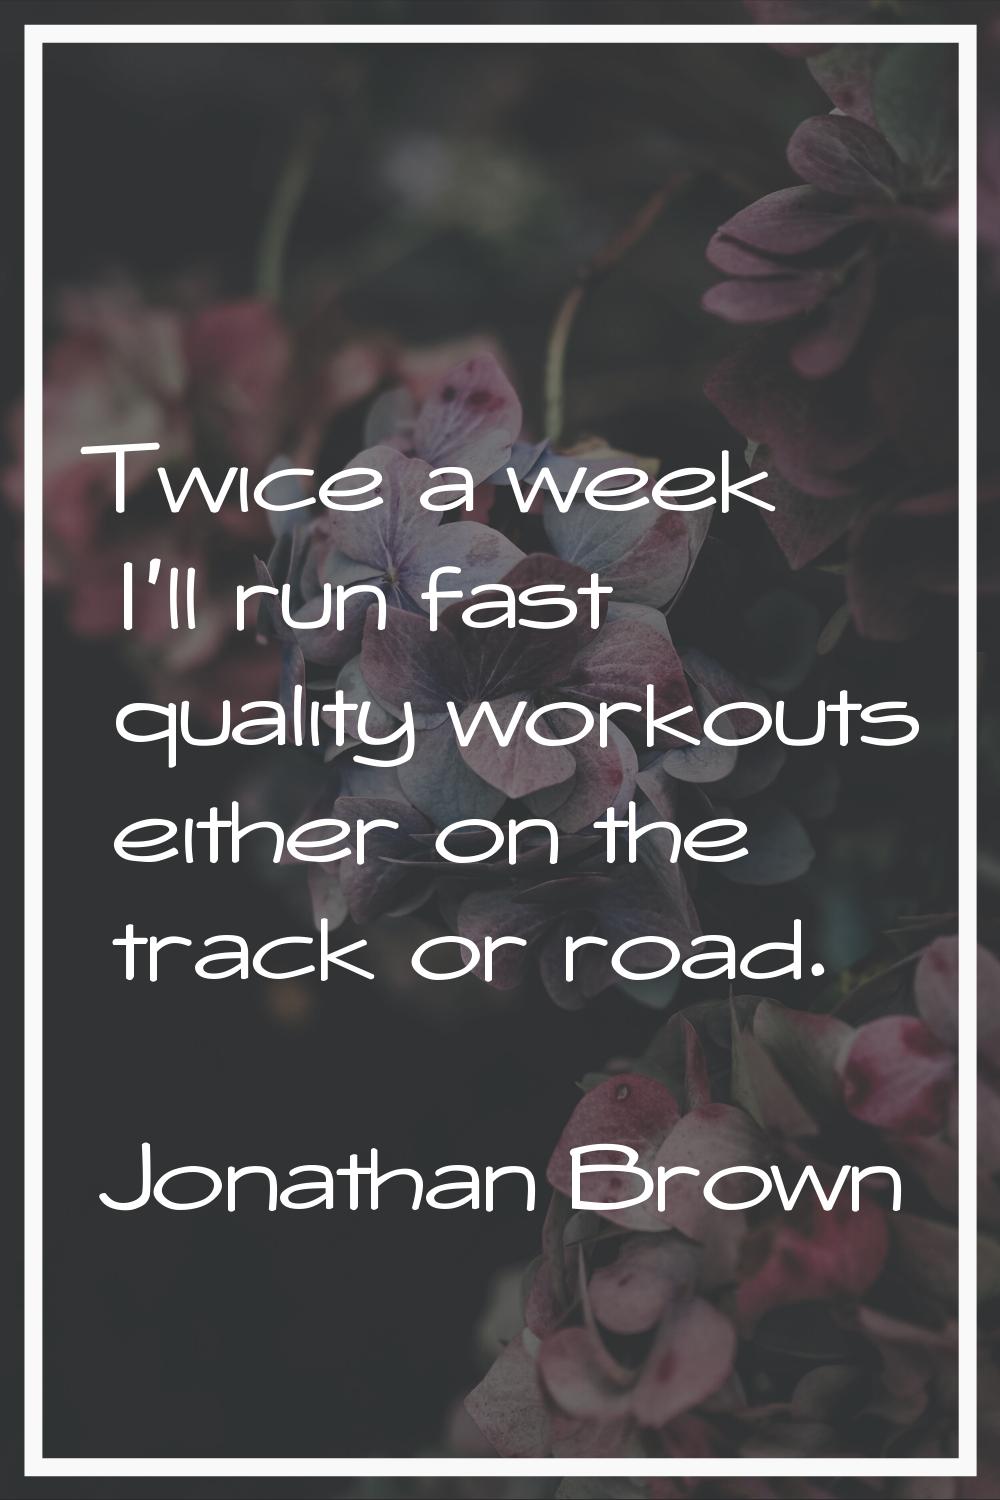 Twice a week I'll run fast quality workouts either on the track or road.